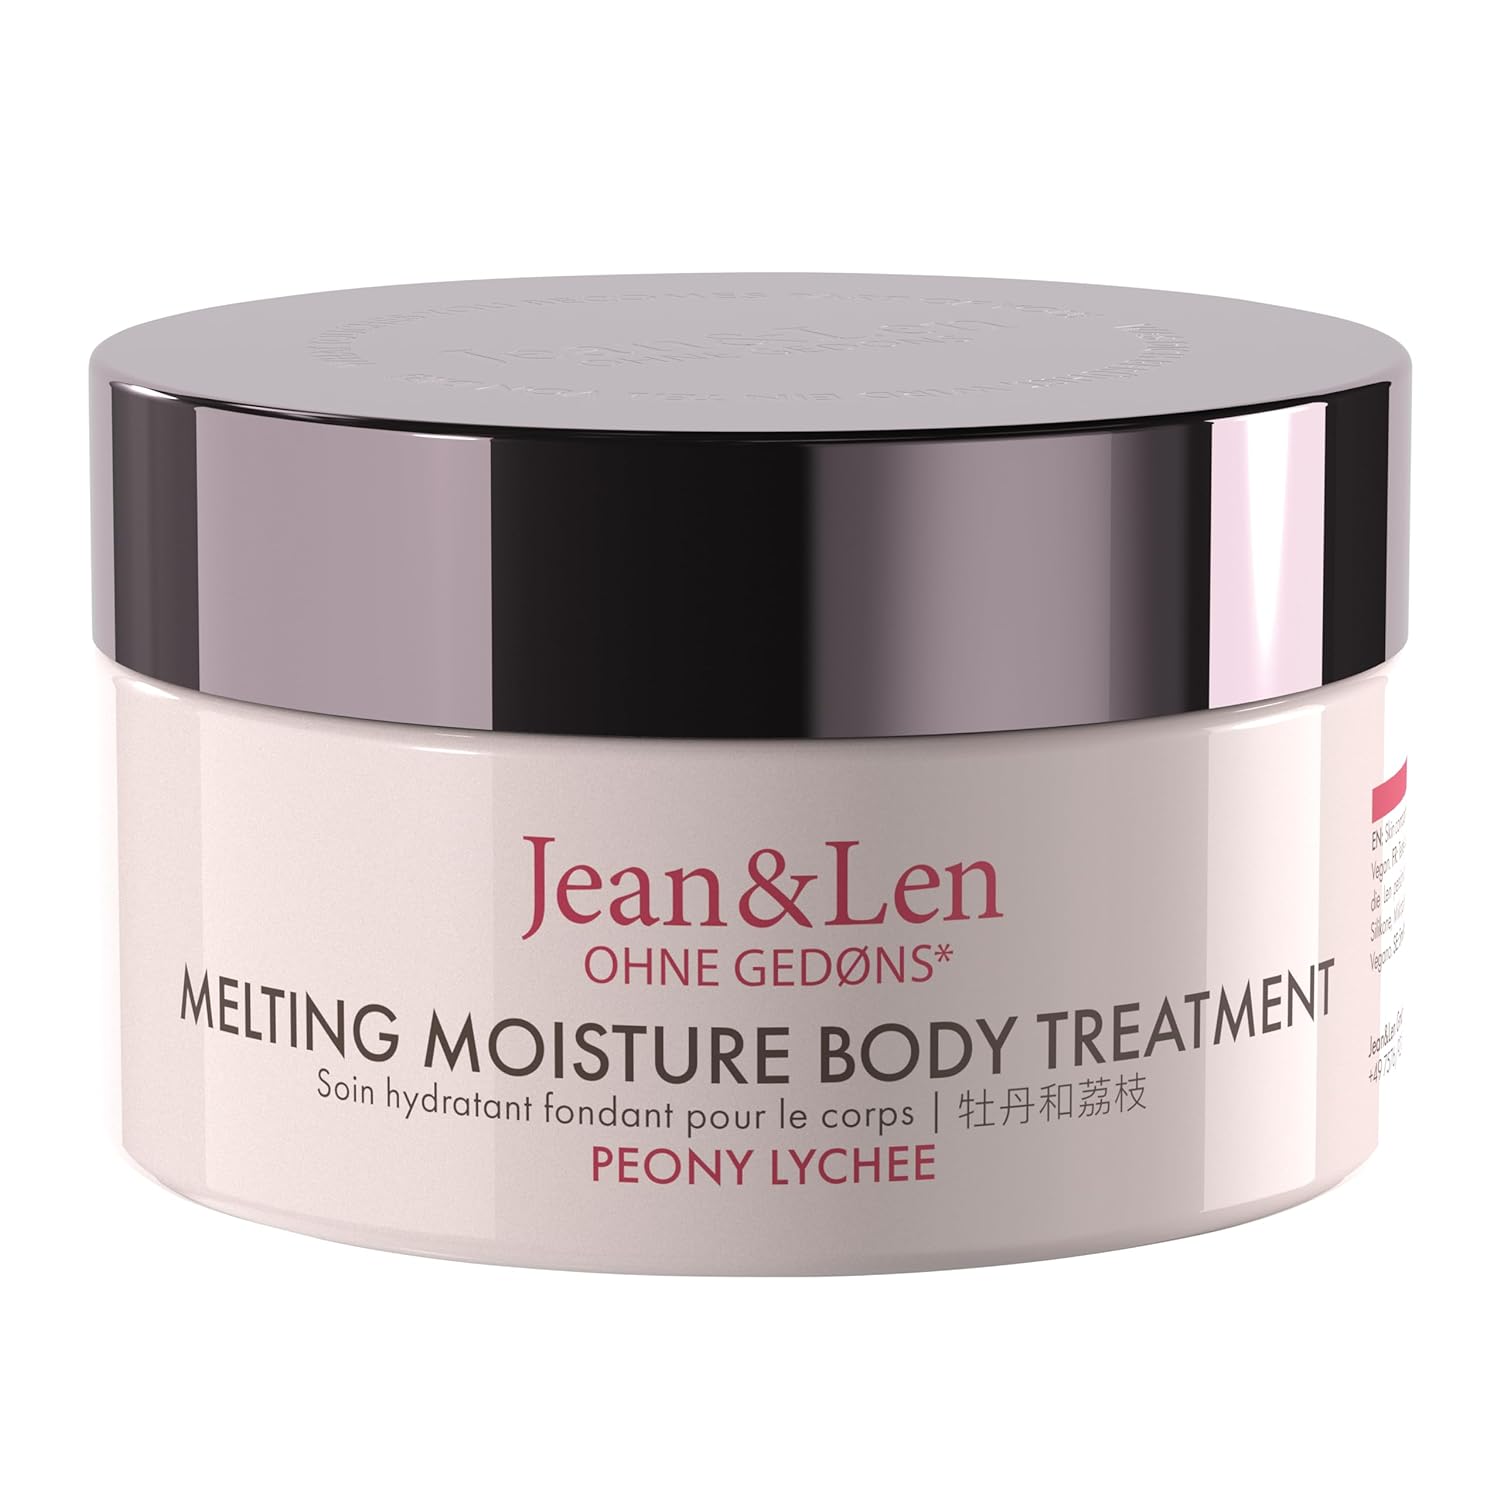 Jean & Len Melting Moisture Body Treatment Peony & Lychee, for a Scented Care Result, For Normal Skin, High-Quality Jar, Nourishing Body Butter, Parabens & Silicones, Vegan, 200 ml